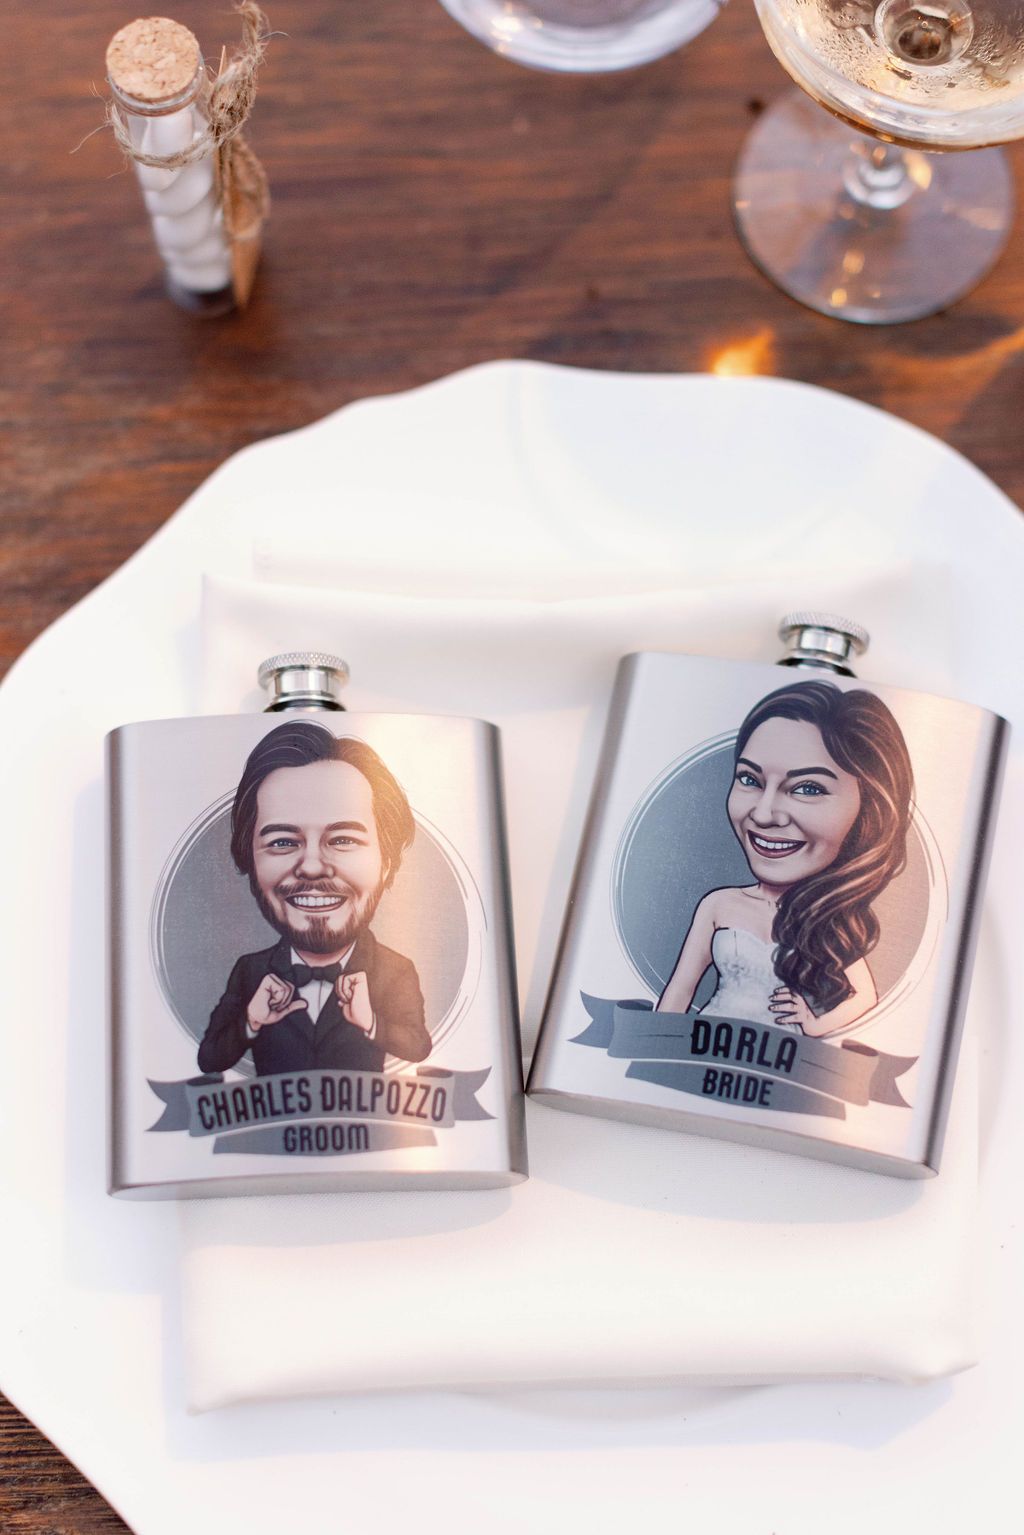 Bride and Groom personalized matching flasks with photo at Mission Santa Barbara wedding | Photo by Sarah Block Photography